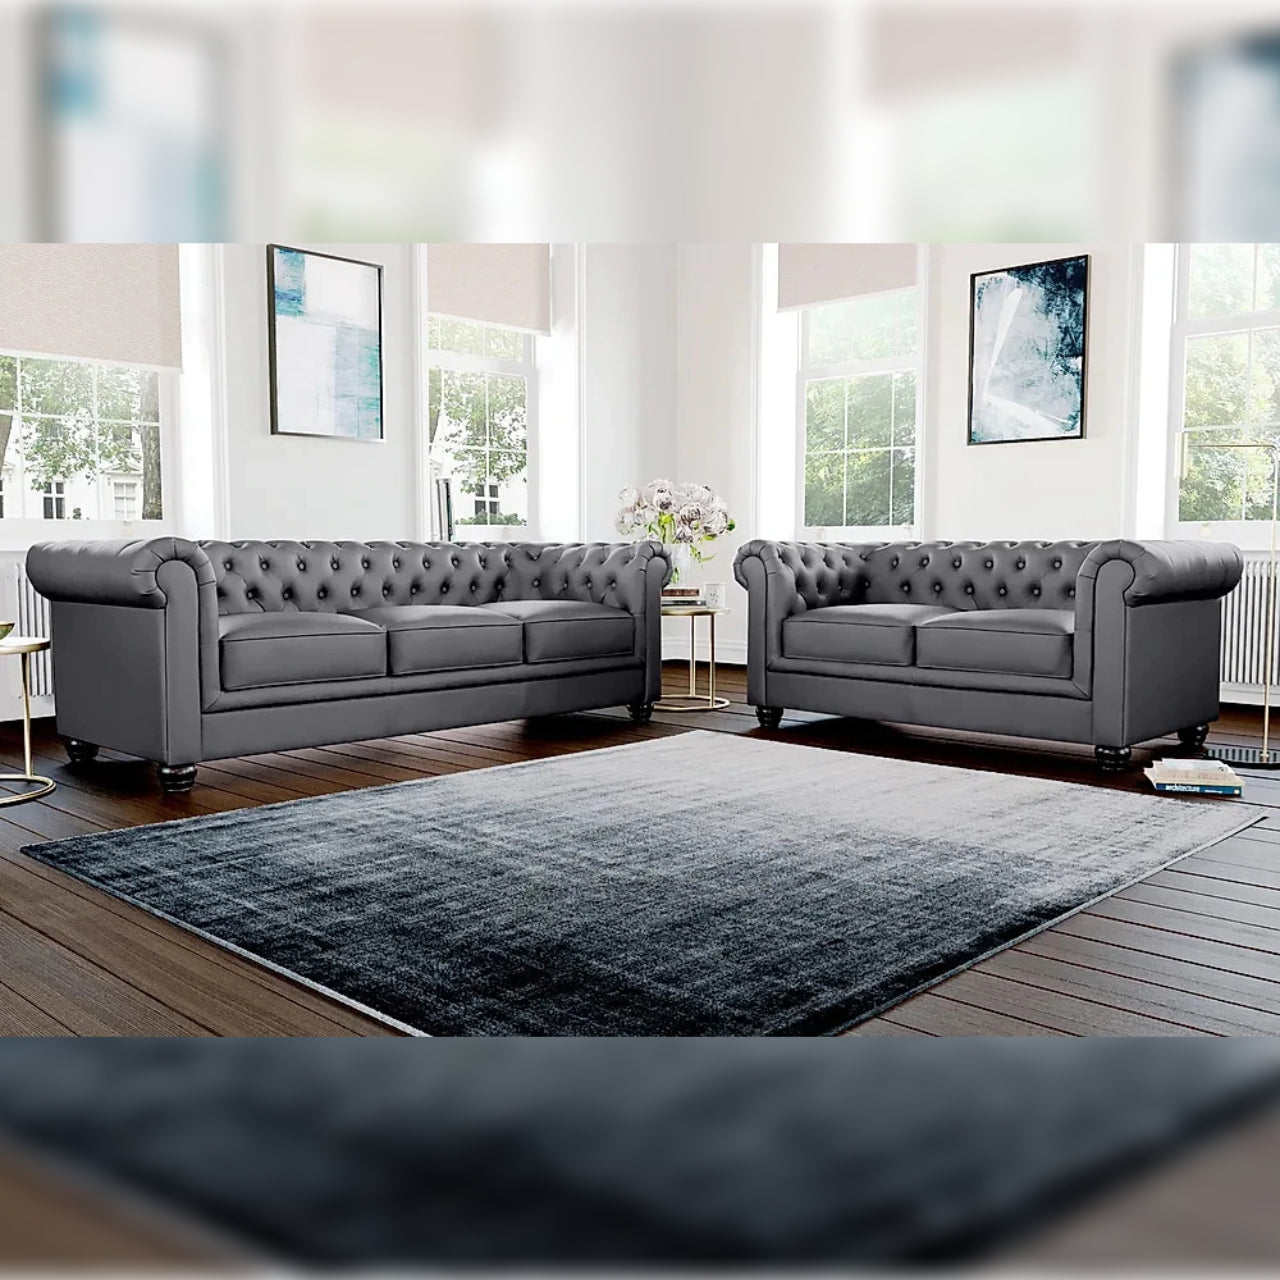 Chesterfield Sofa Set Grey Leatherette